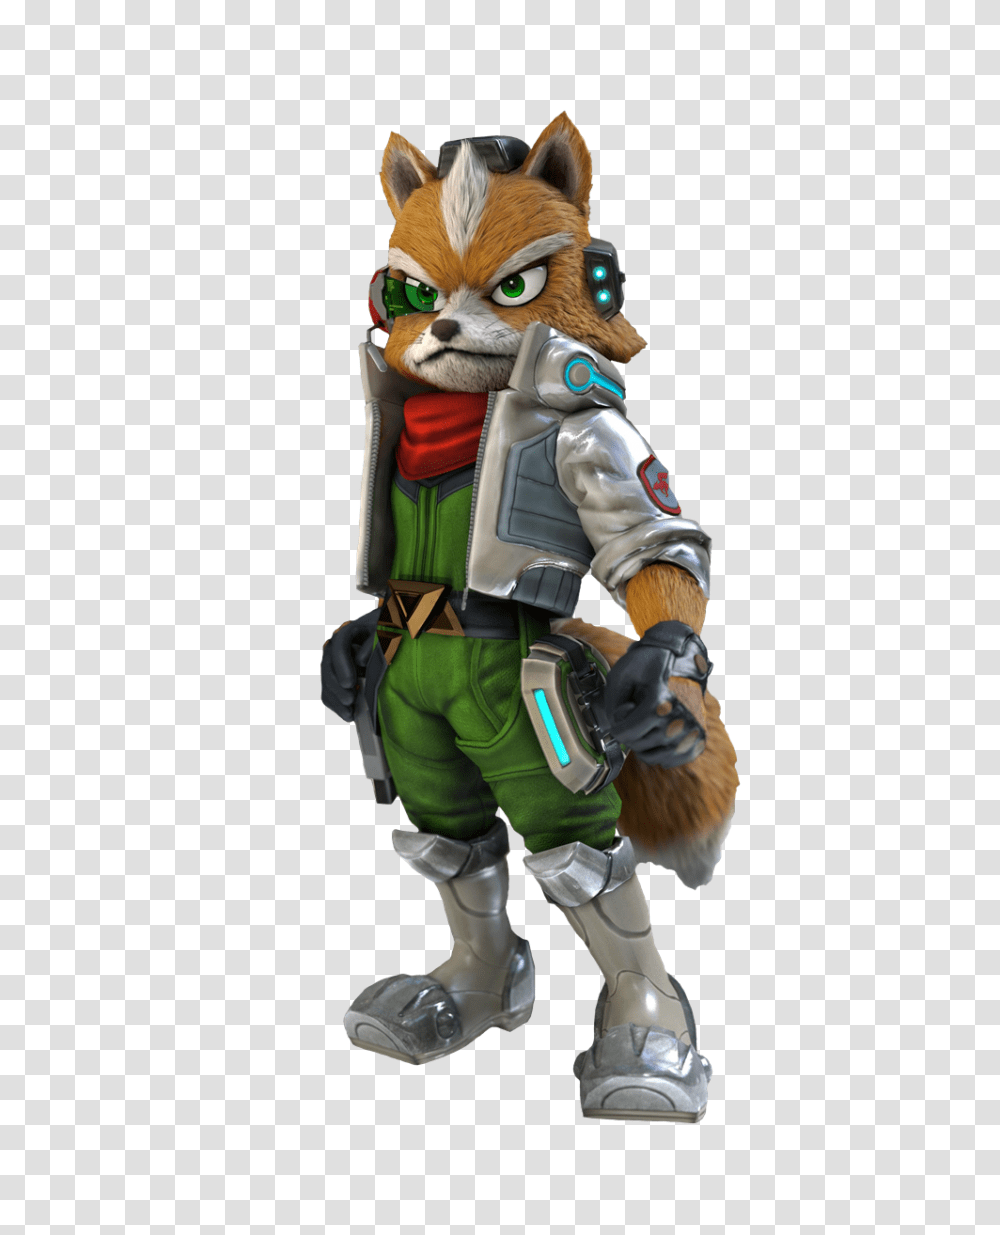 2 Star Fox Picture, Game, Toy, Figurine, Architecture Transparent Png